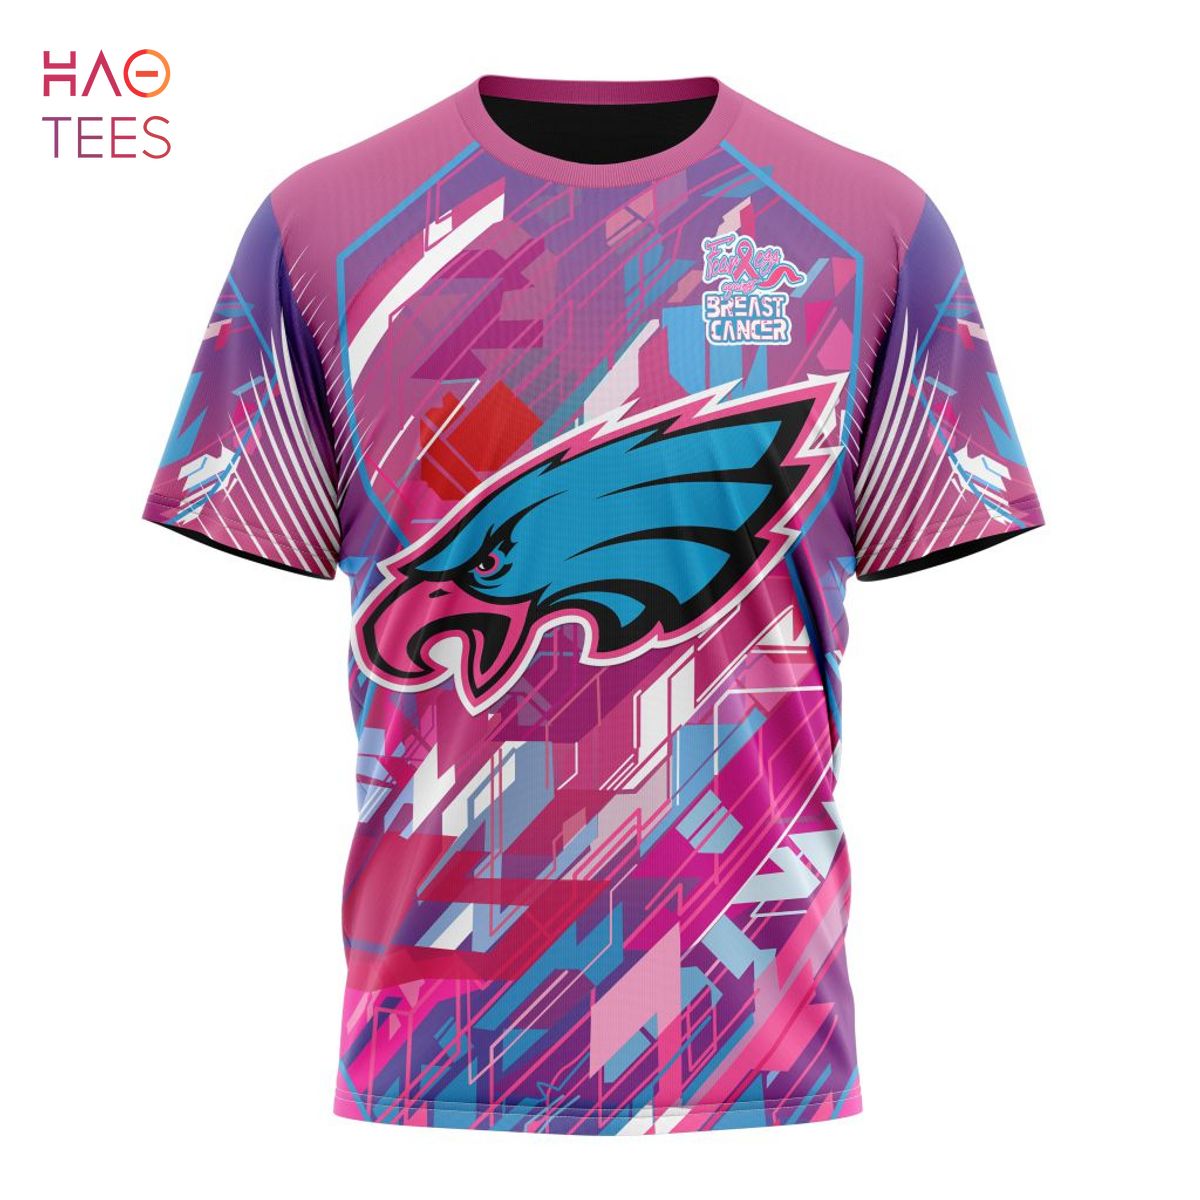 pink eagles jersey